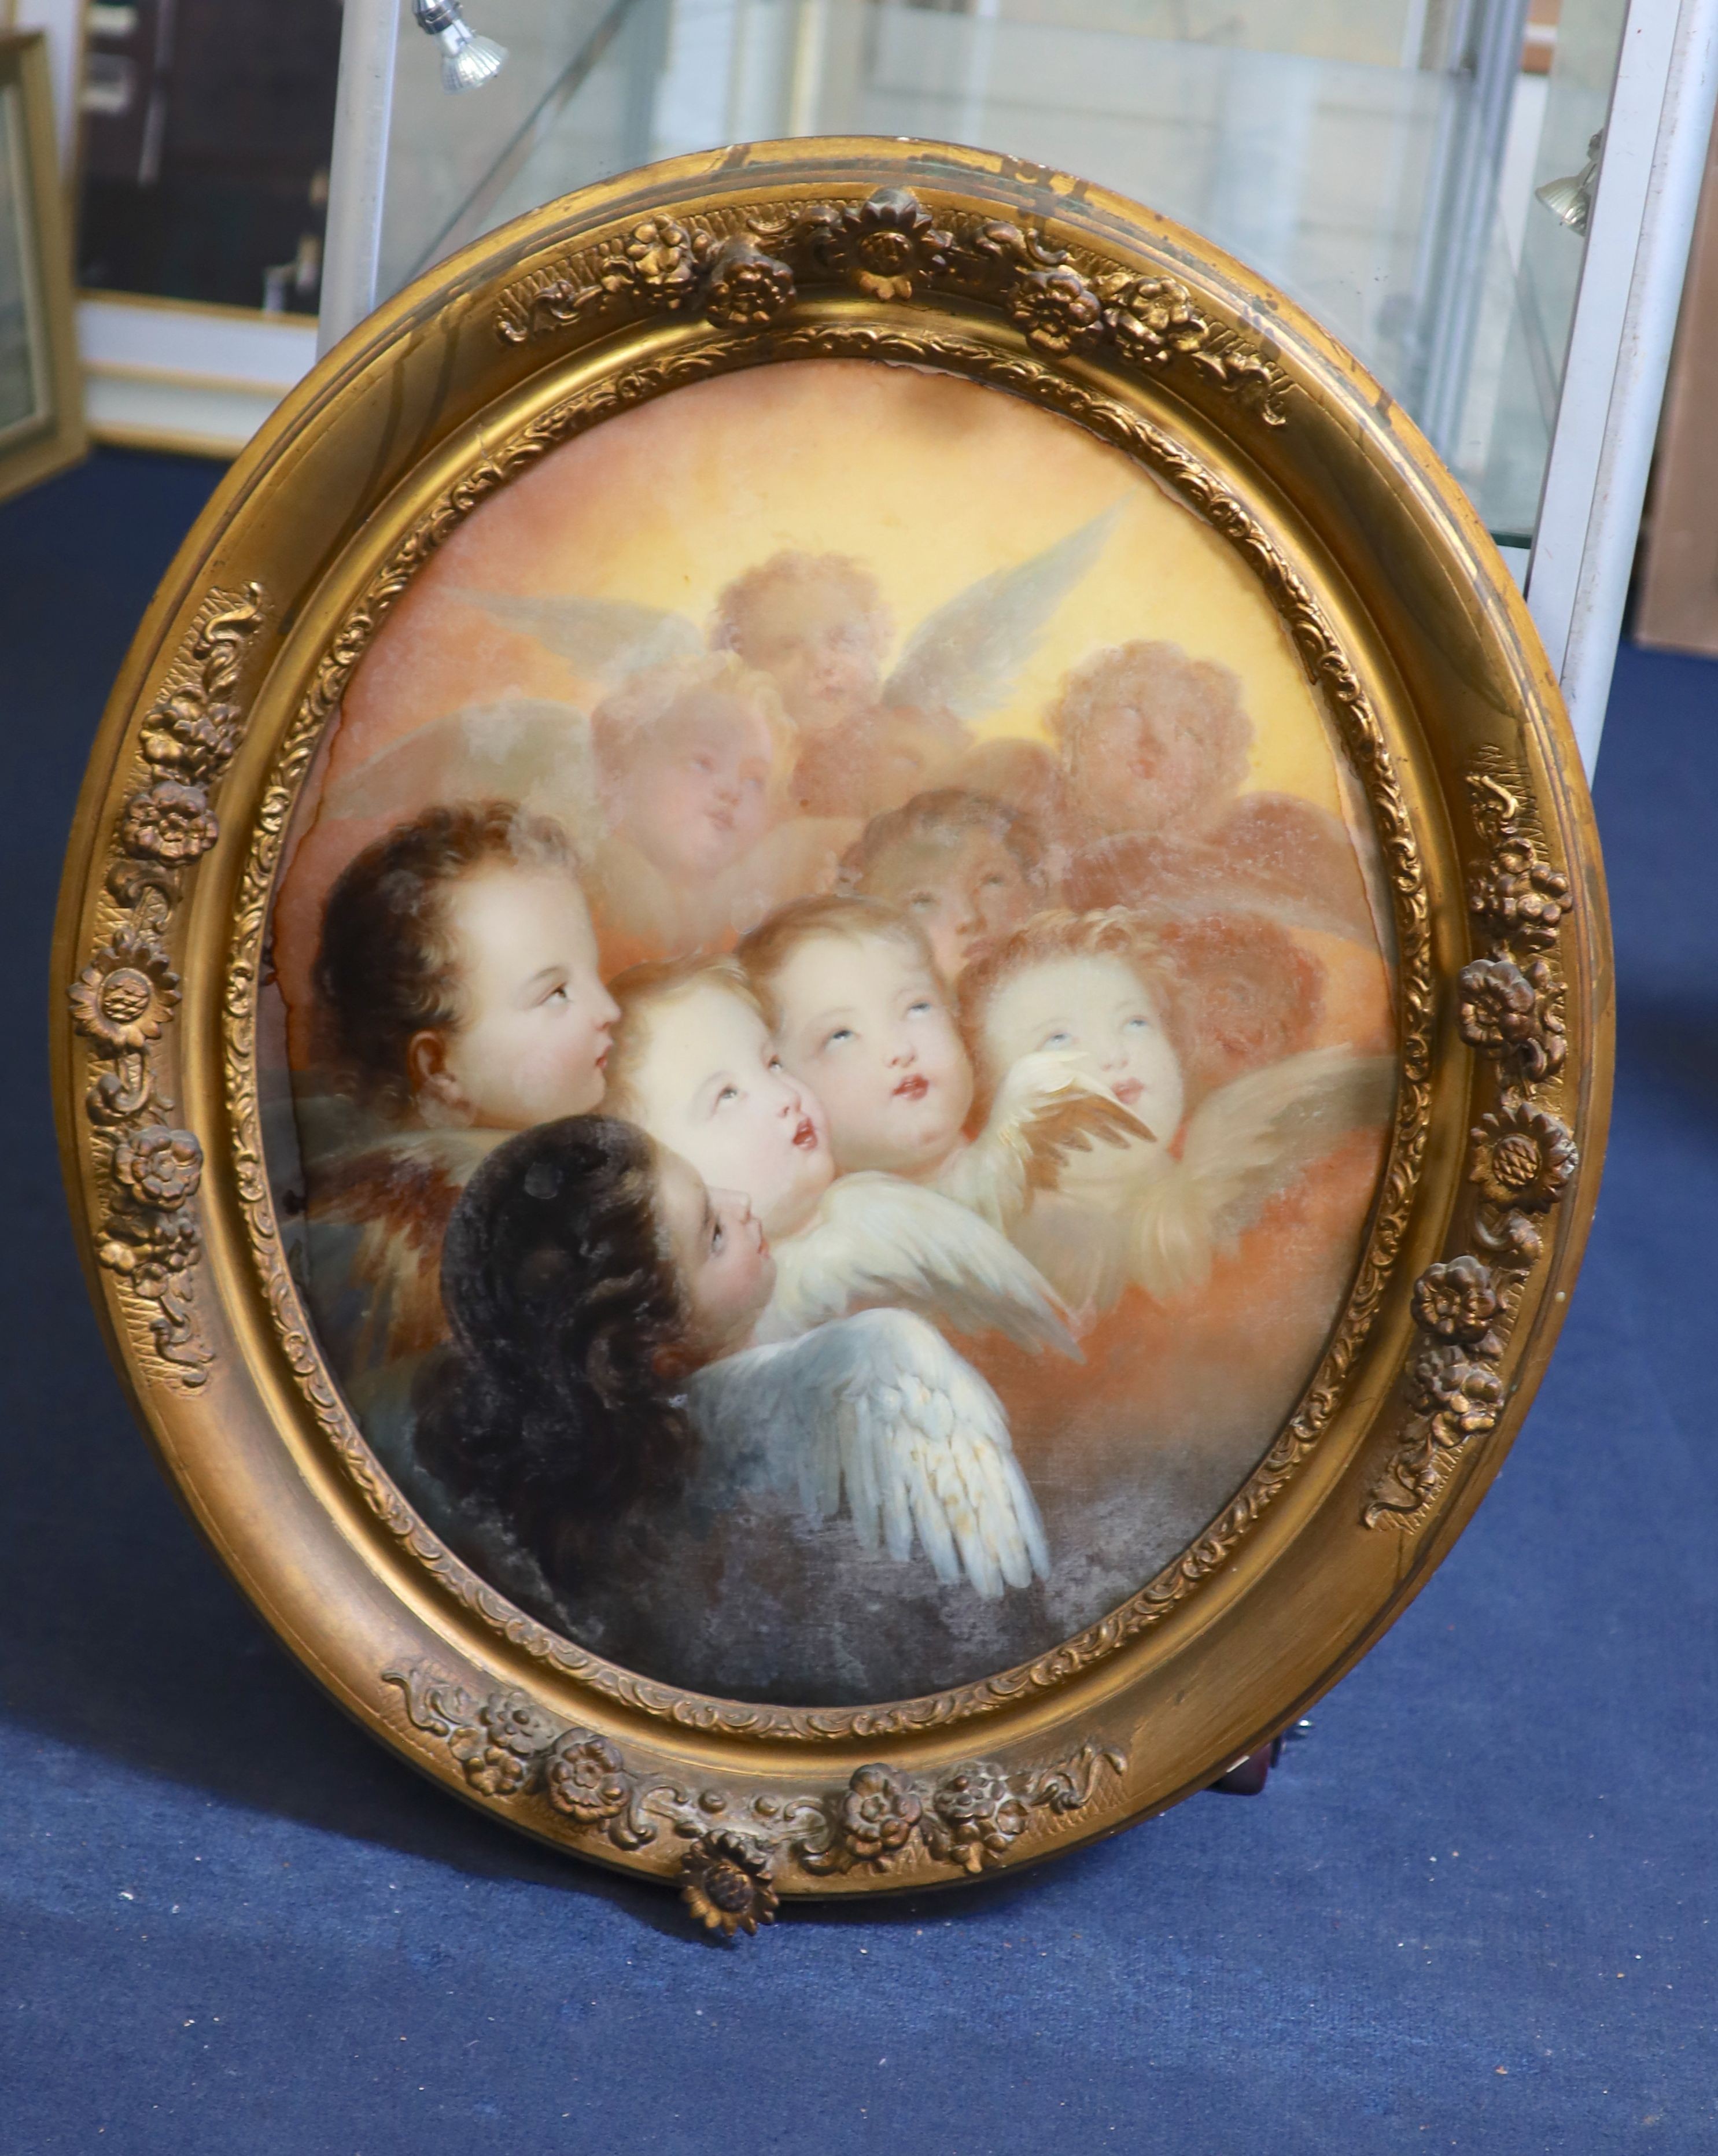 Victorian SchoolReynolds AngelsReverse painting on glass63 x 52cm. - Image 2 of 3